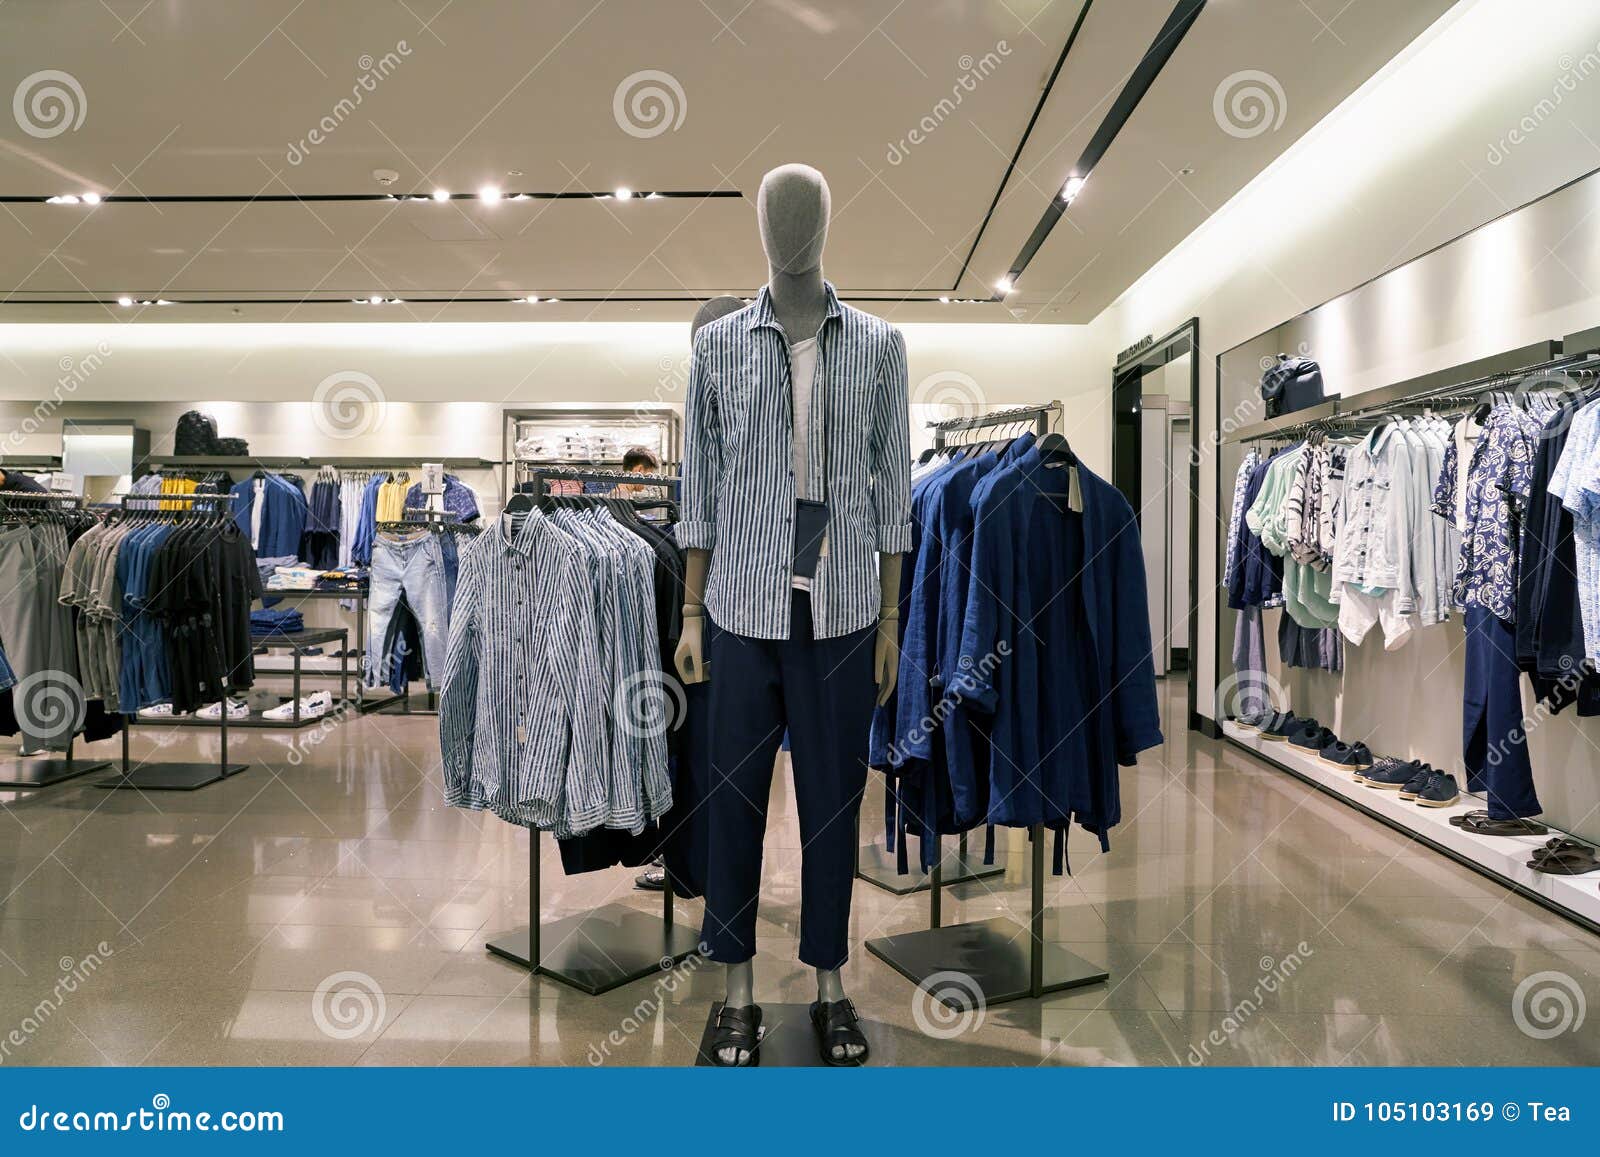 Zara editorial stock image. Image of commercial, clothing - 105103169